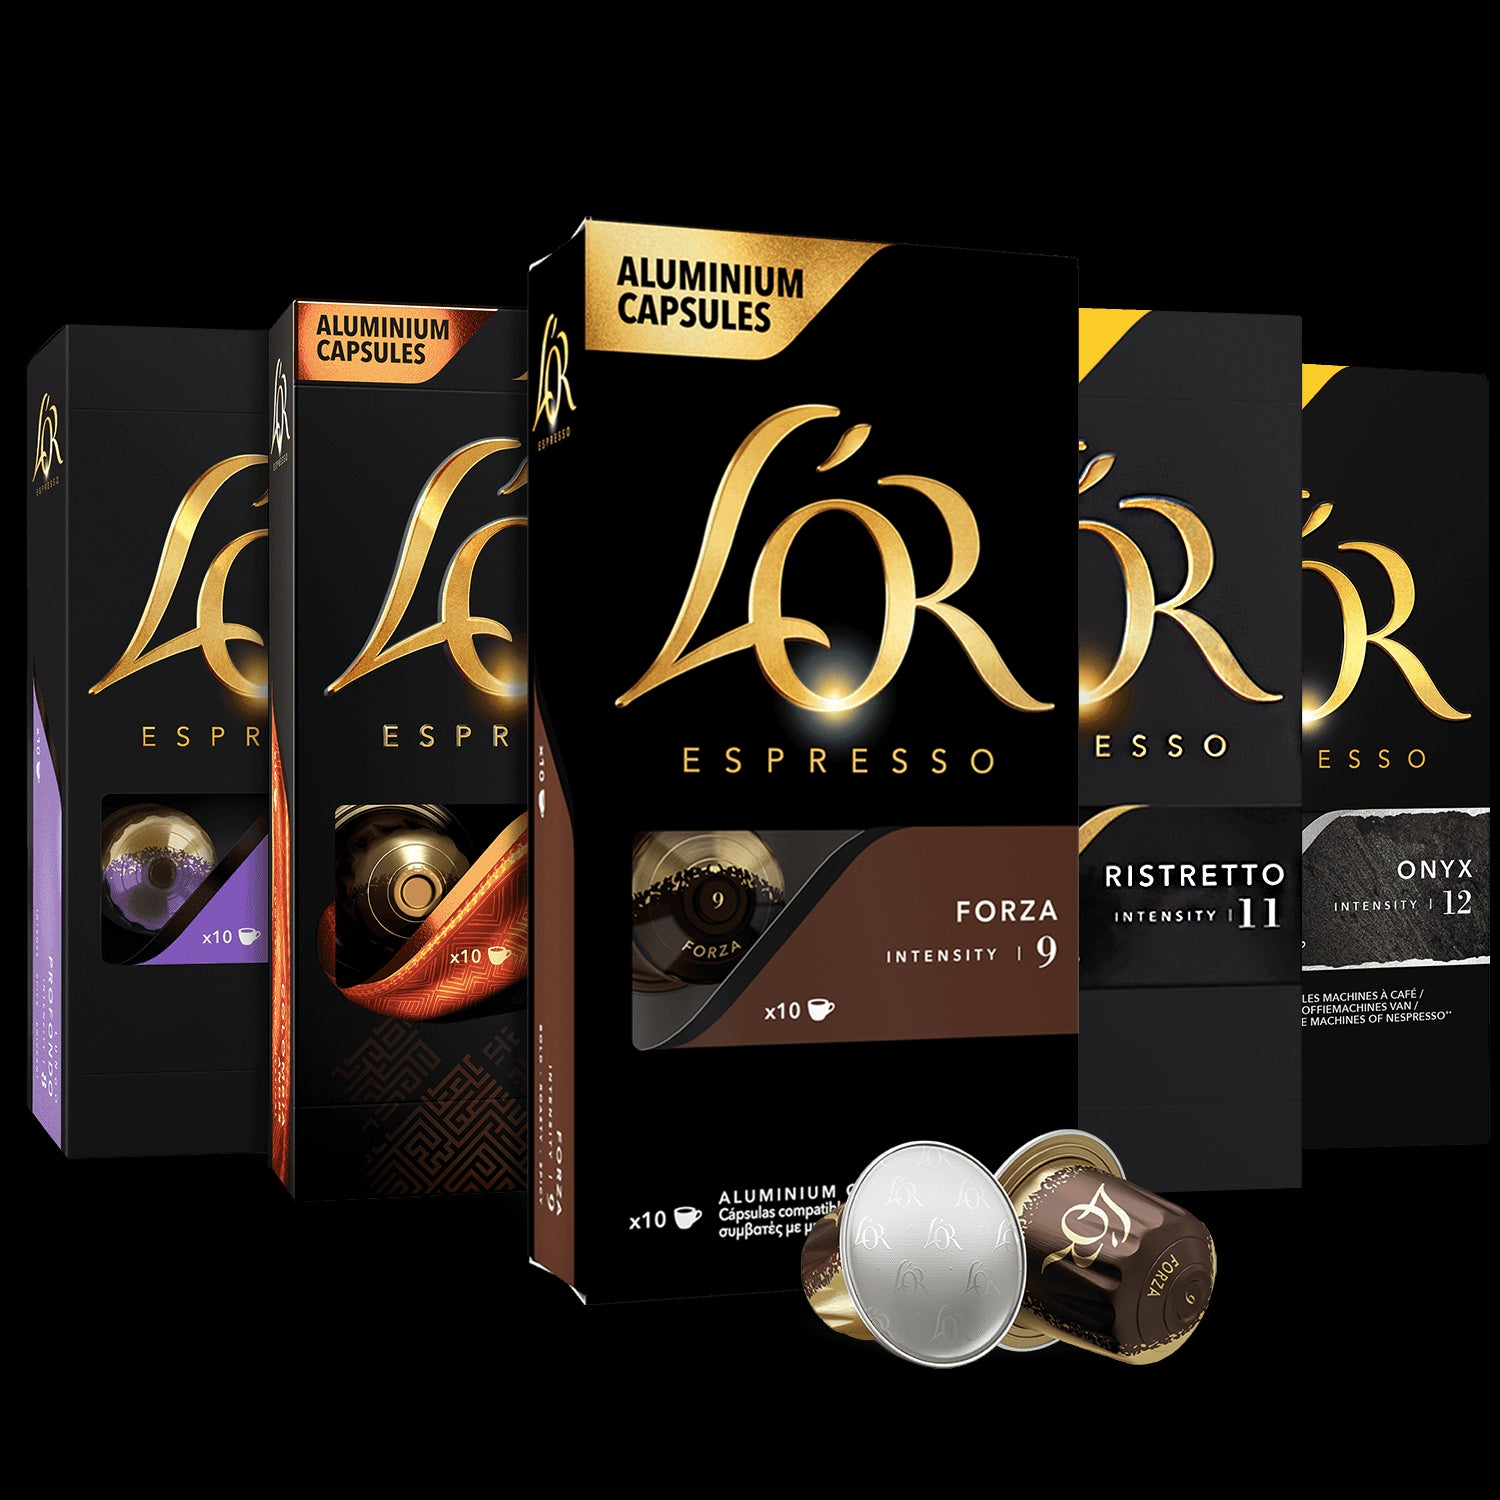 L'Or Expresso Capsules Décaffeinato N°6 x10 52g